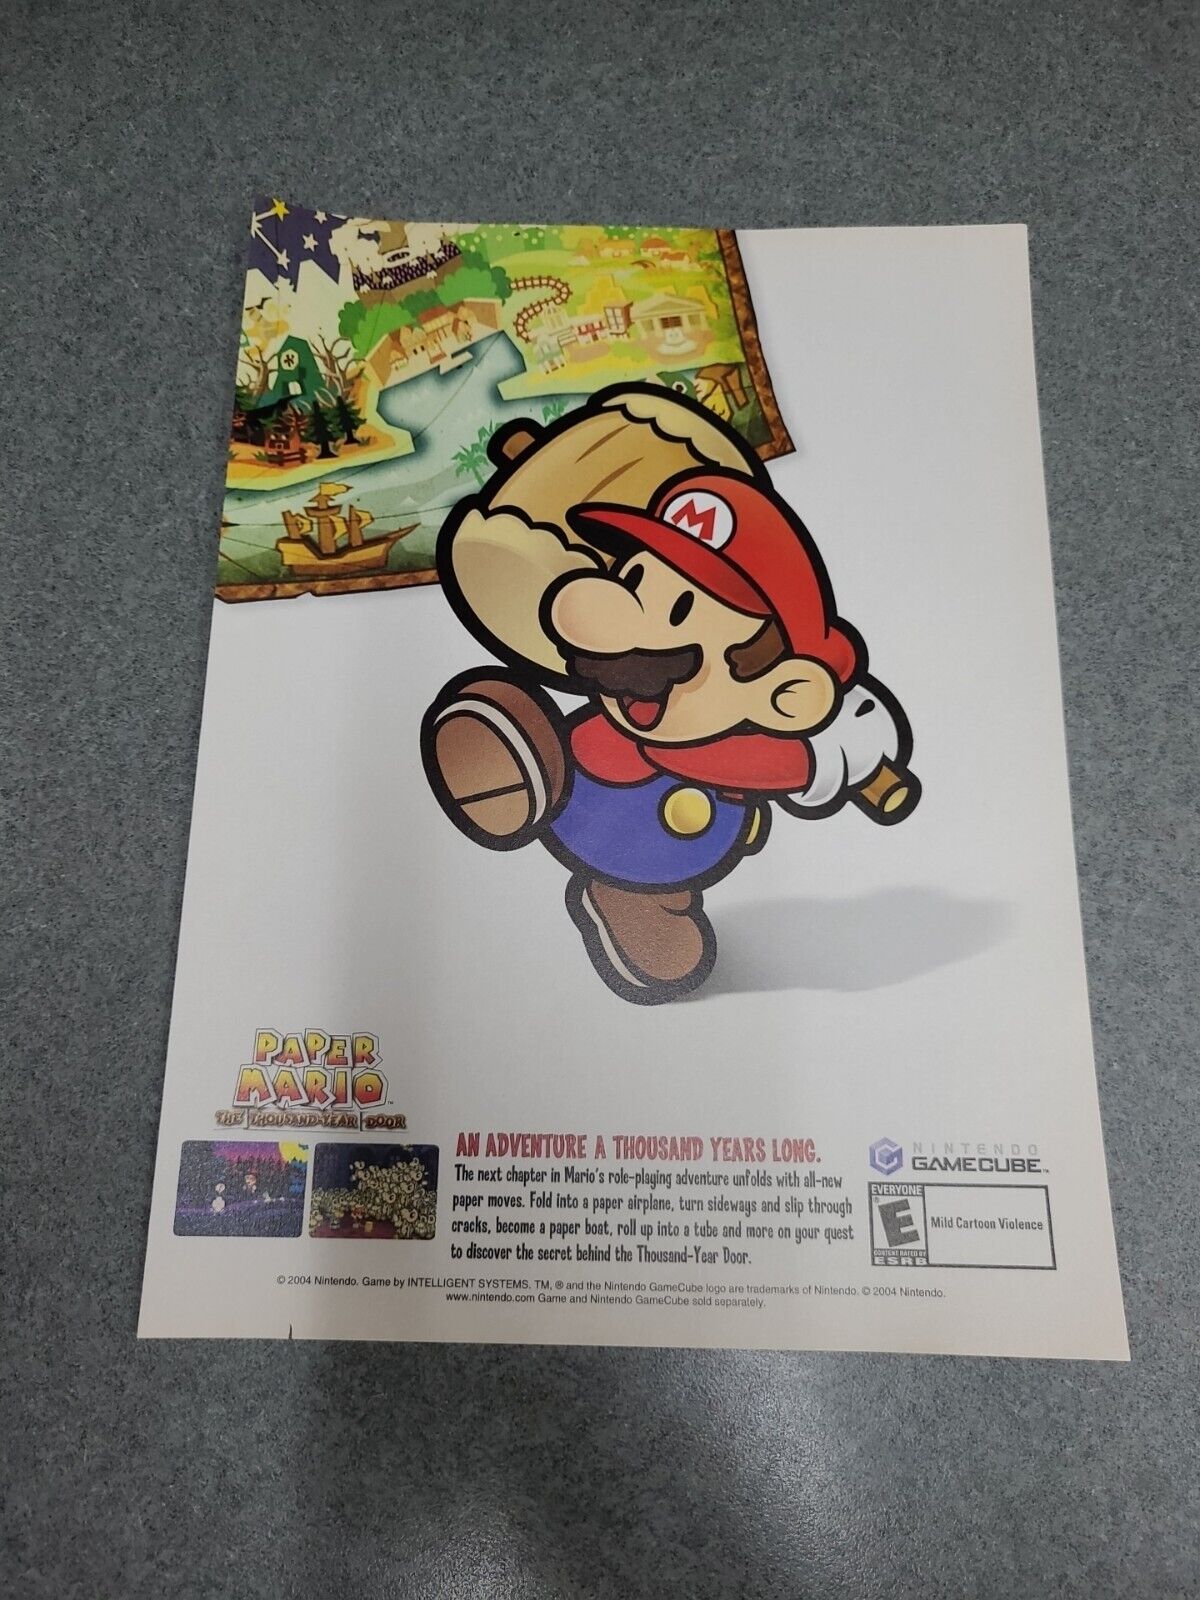 2004 Paper Mario The Thousand Year Door 2 Sided Print Ad Gamecube 8x11 